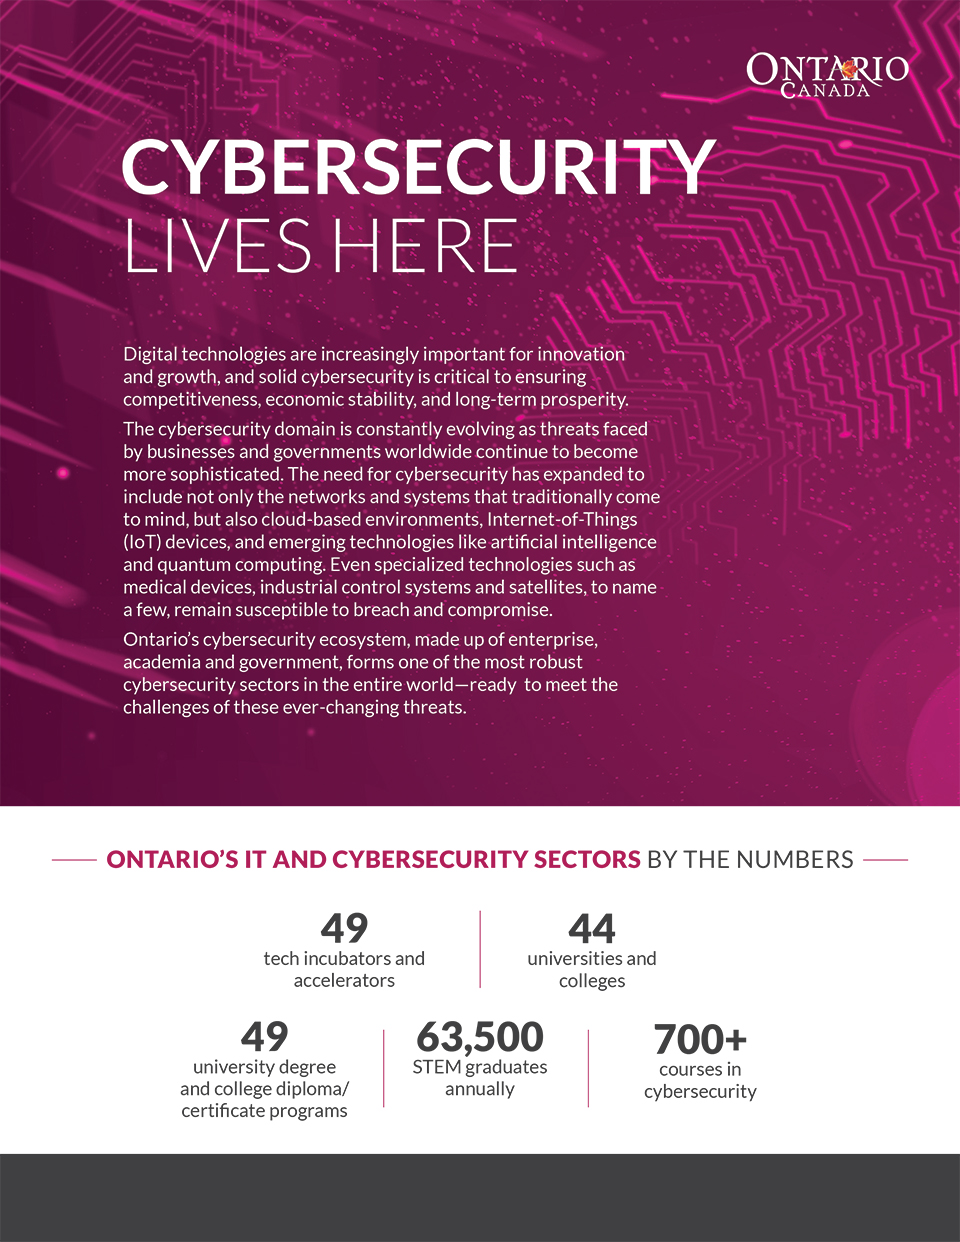 thumbnail image for cybersecurity brochure